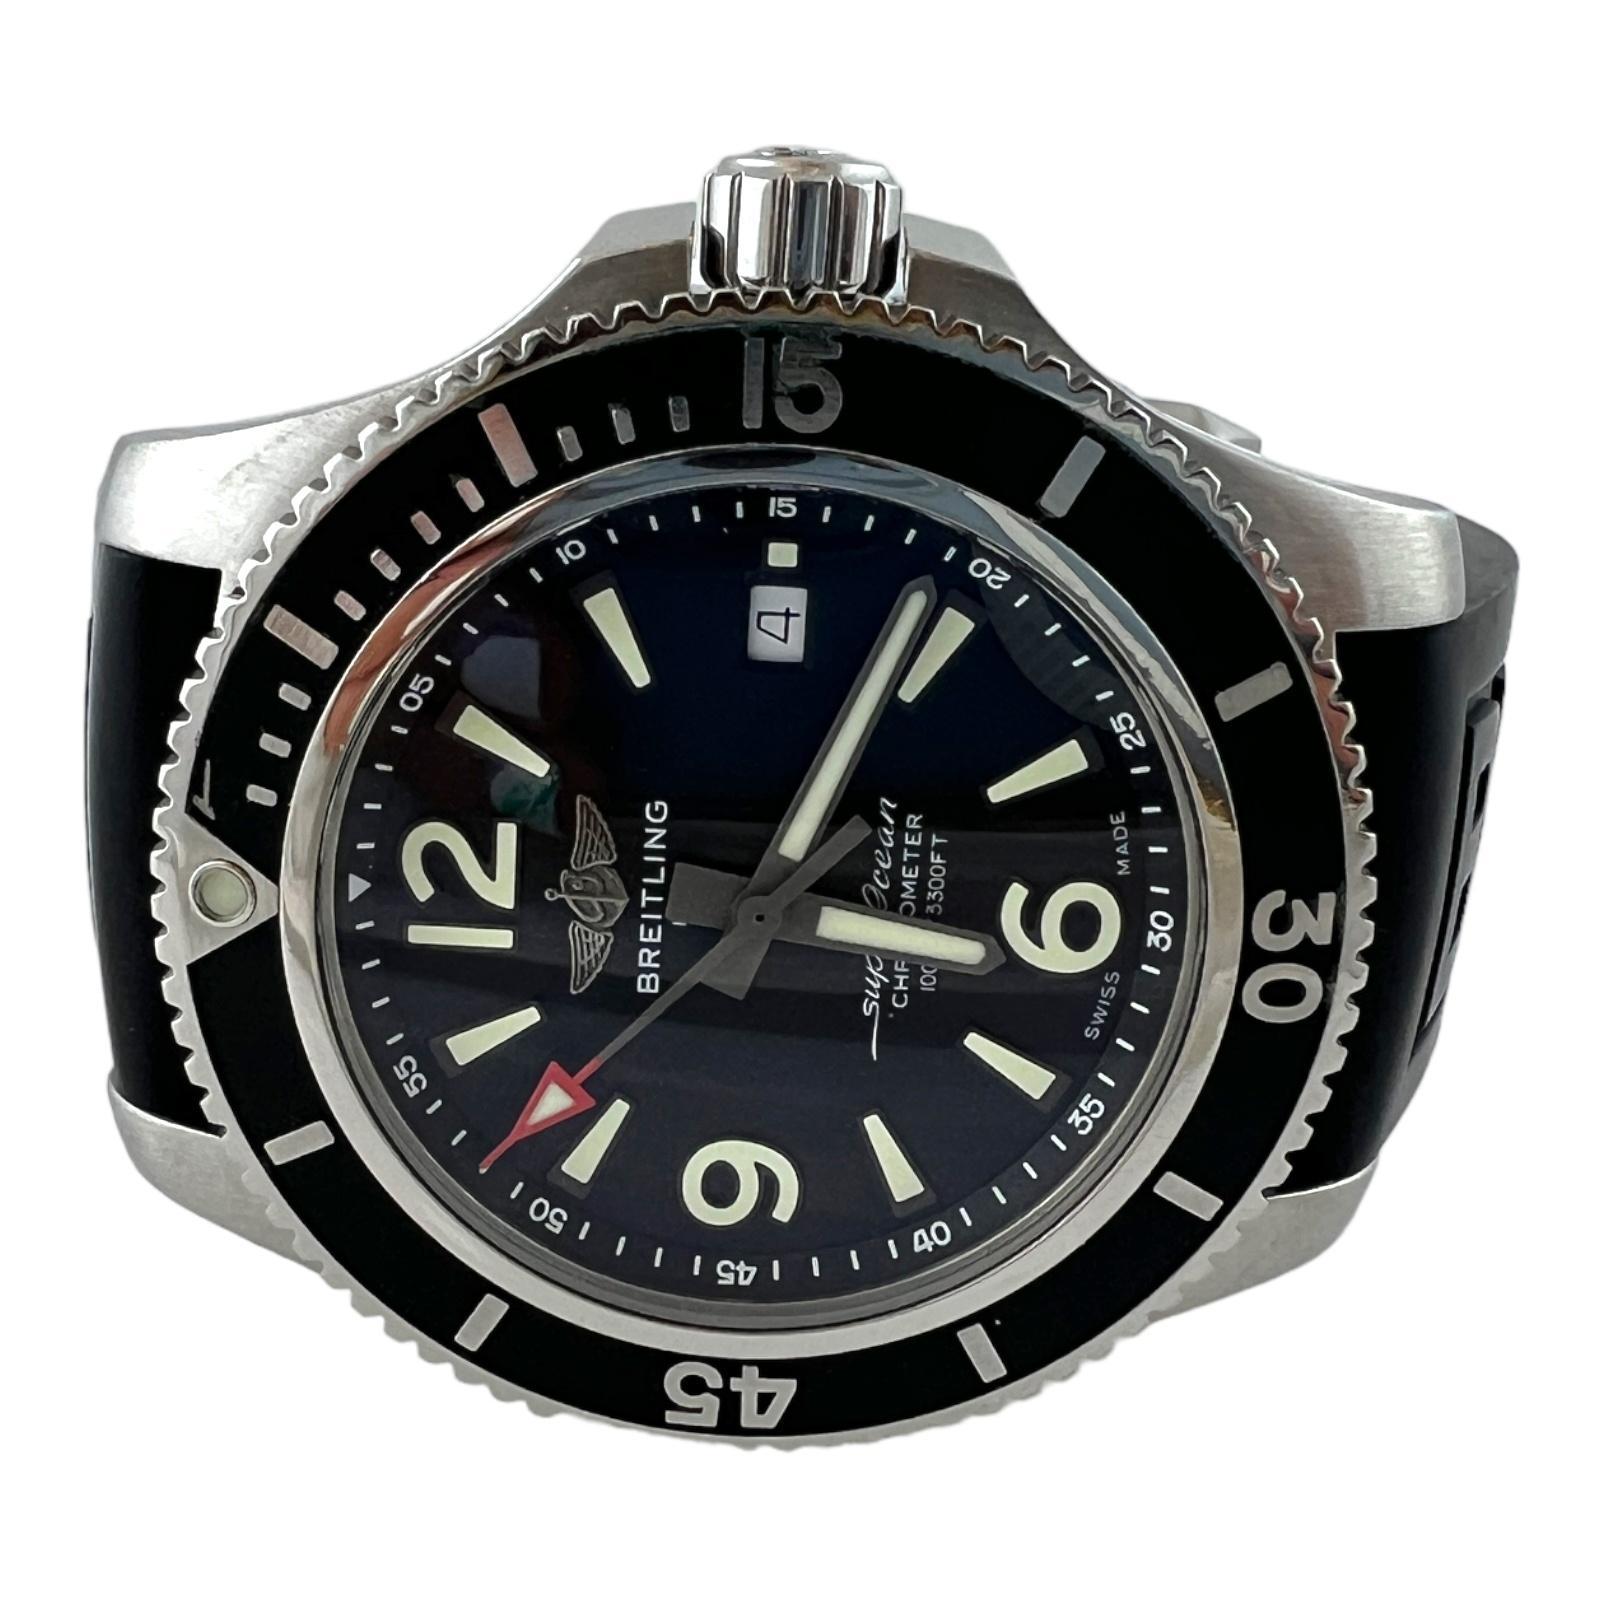 Breitling SuperOcean Men's Watch

Model: A17367
Serial: 7281262

Black dial with luminescent stick and arabic markers. 

Black Bezel

Black Rubber 